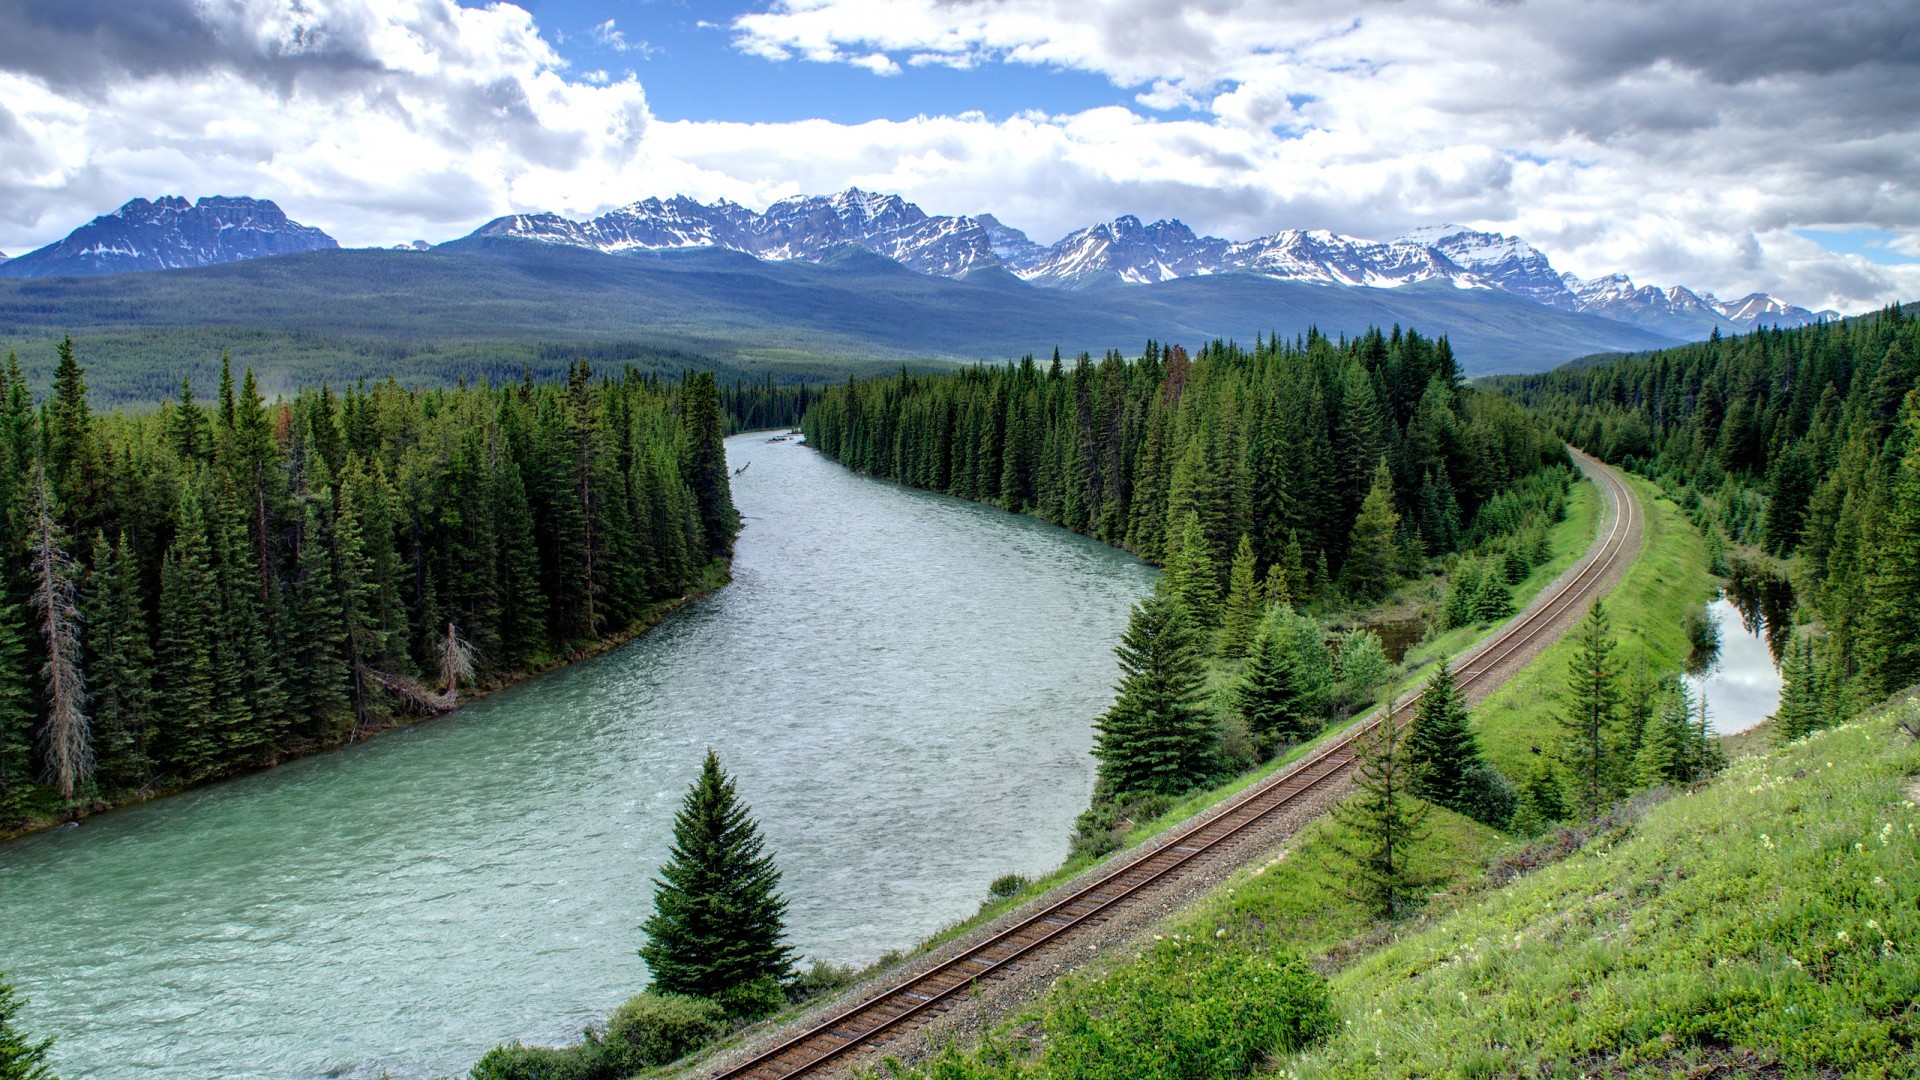 General 1920x1080 landscape river forest railway nature mountains Canada Canadian Pacific Railway